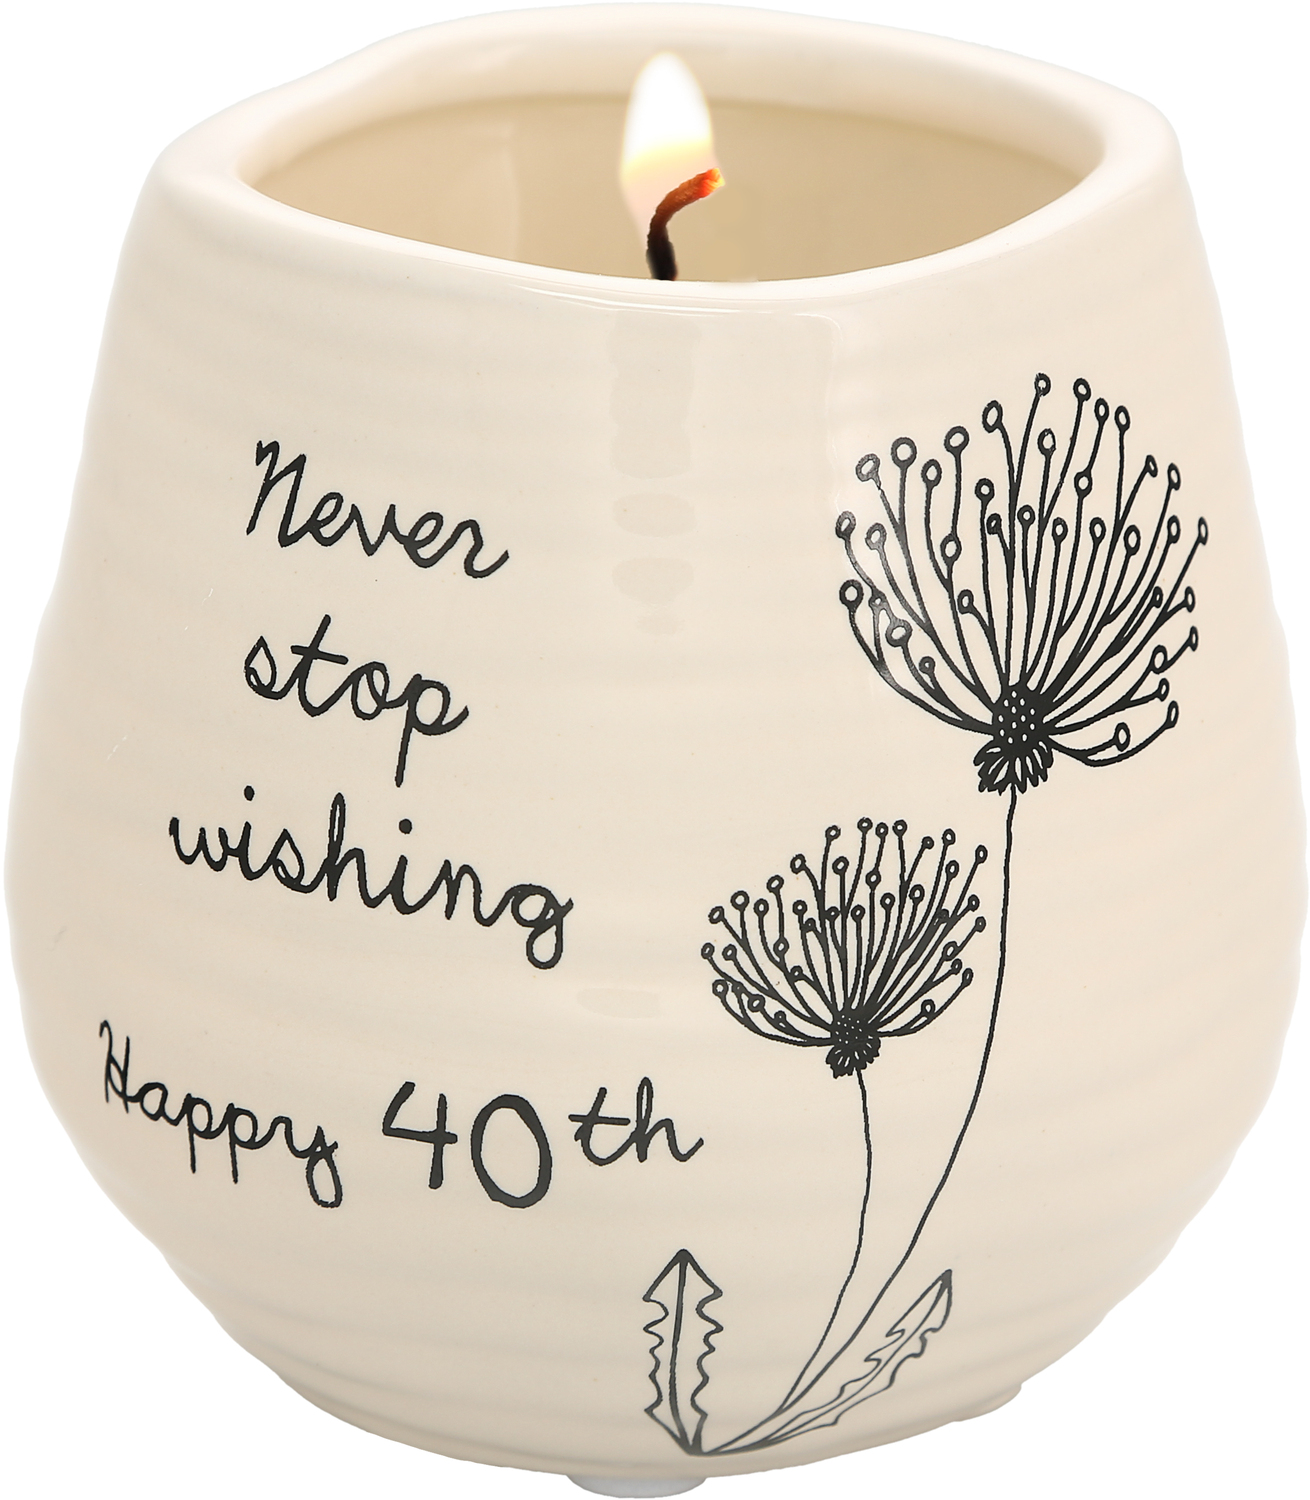 Happy 40th by Dandelion Wishes - Happy 40th - 8 oz - 100% Soy Wax Candle
Scent: Serenity